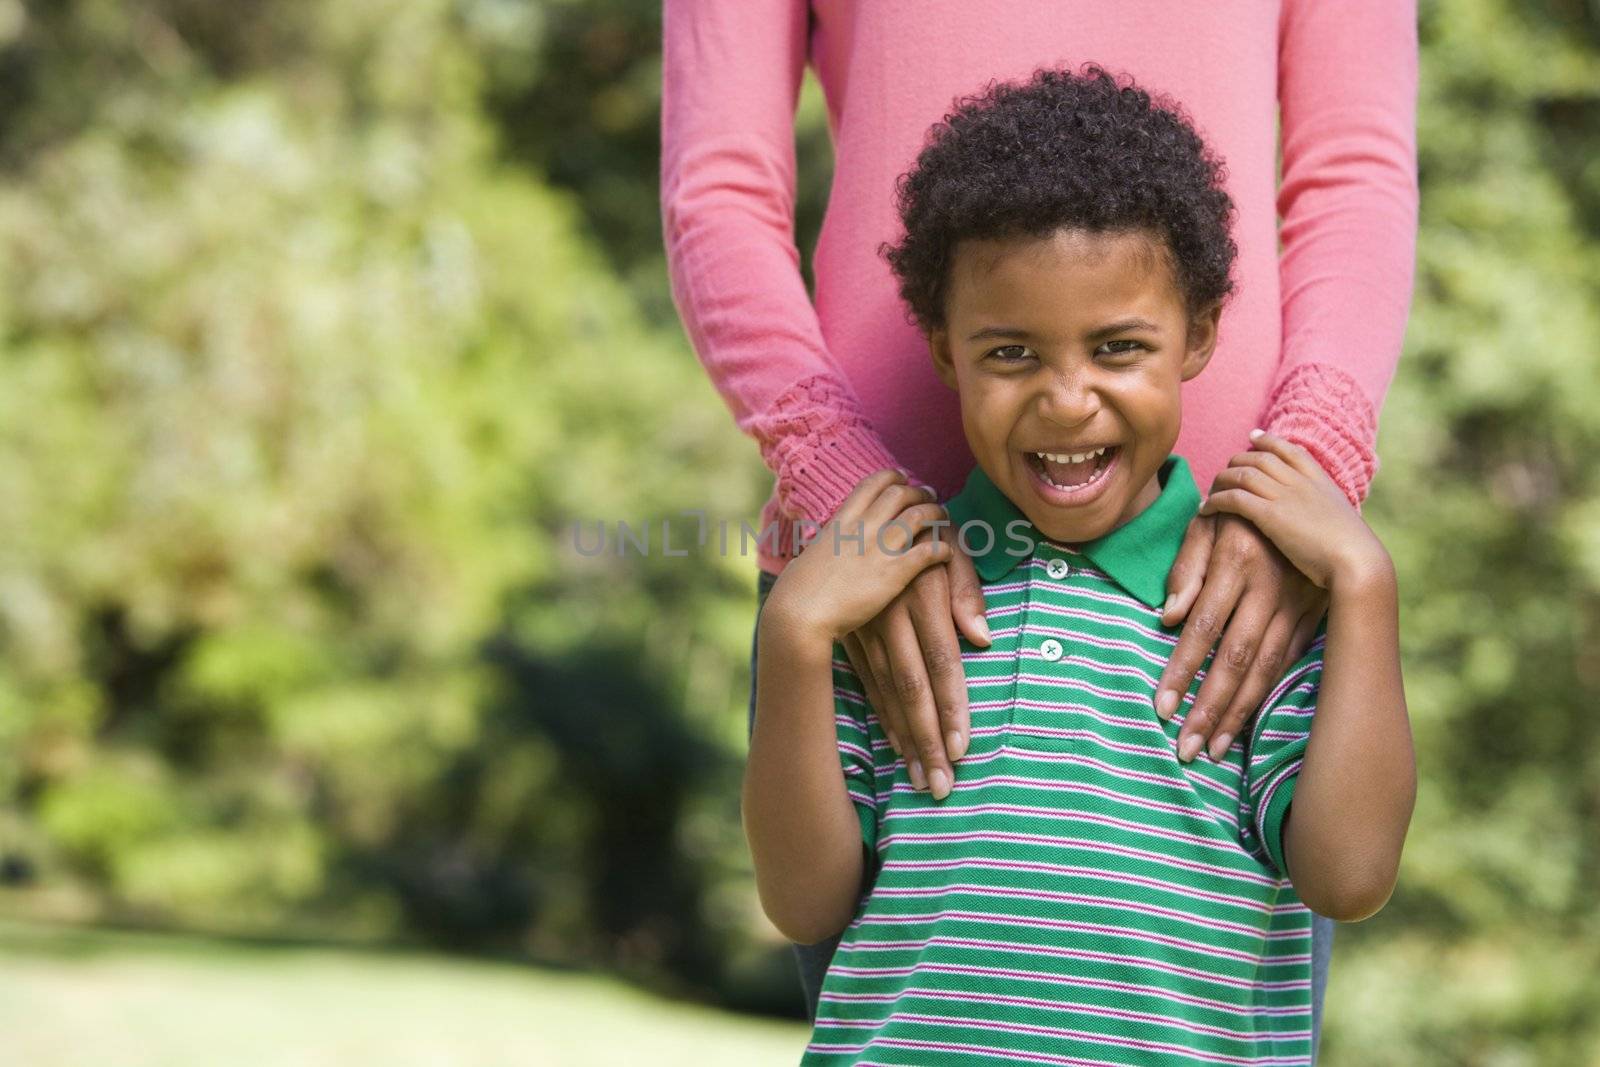 Boy in park making funny expression with mother's hands on shoulders.